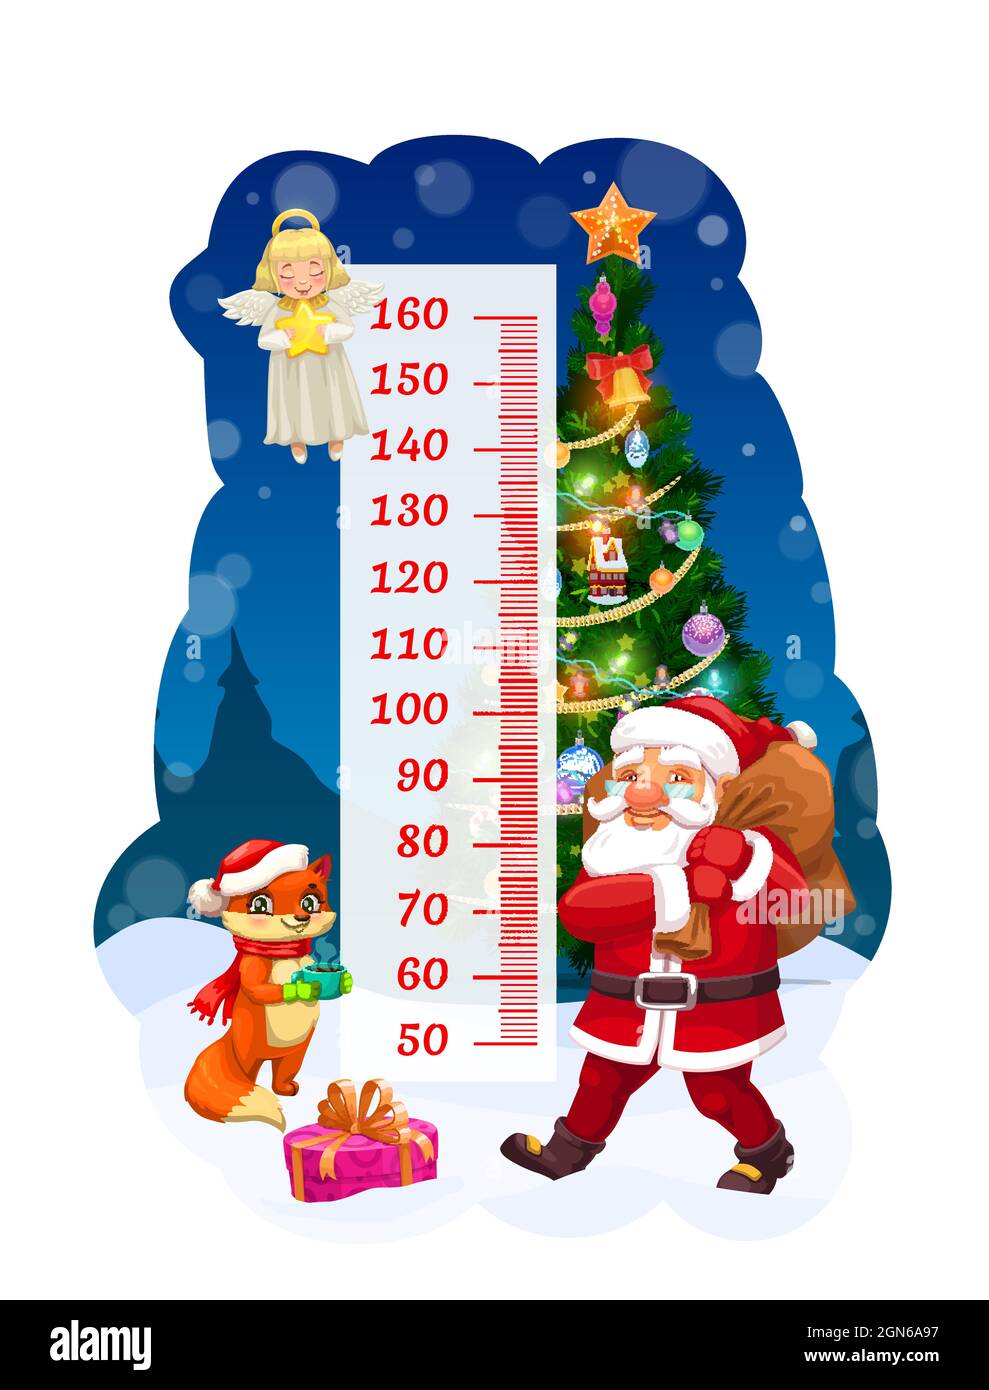 https://c8.alamy.com/comp/2GN6A97/kids-height-chart-santa-with-gift-bag-growth-meter-vector-wall-sticker-for-children-height-measurement-with-cartoon-characters-angel-santa-claus-and-cute-fox-near-decorated-christmas-tree-and-scale-2GN6A97.jpg